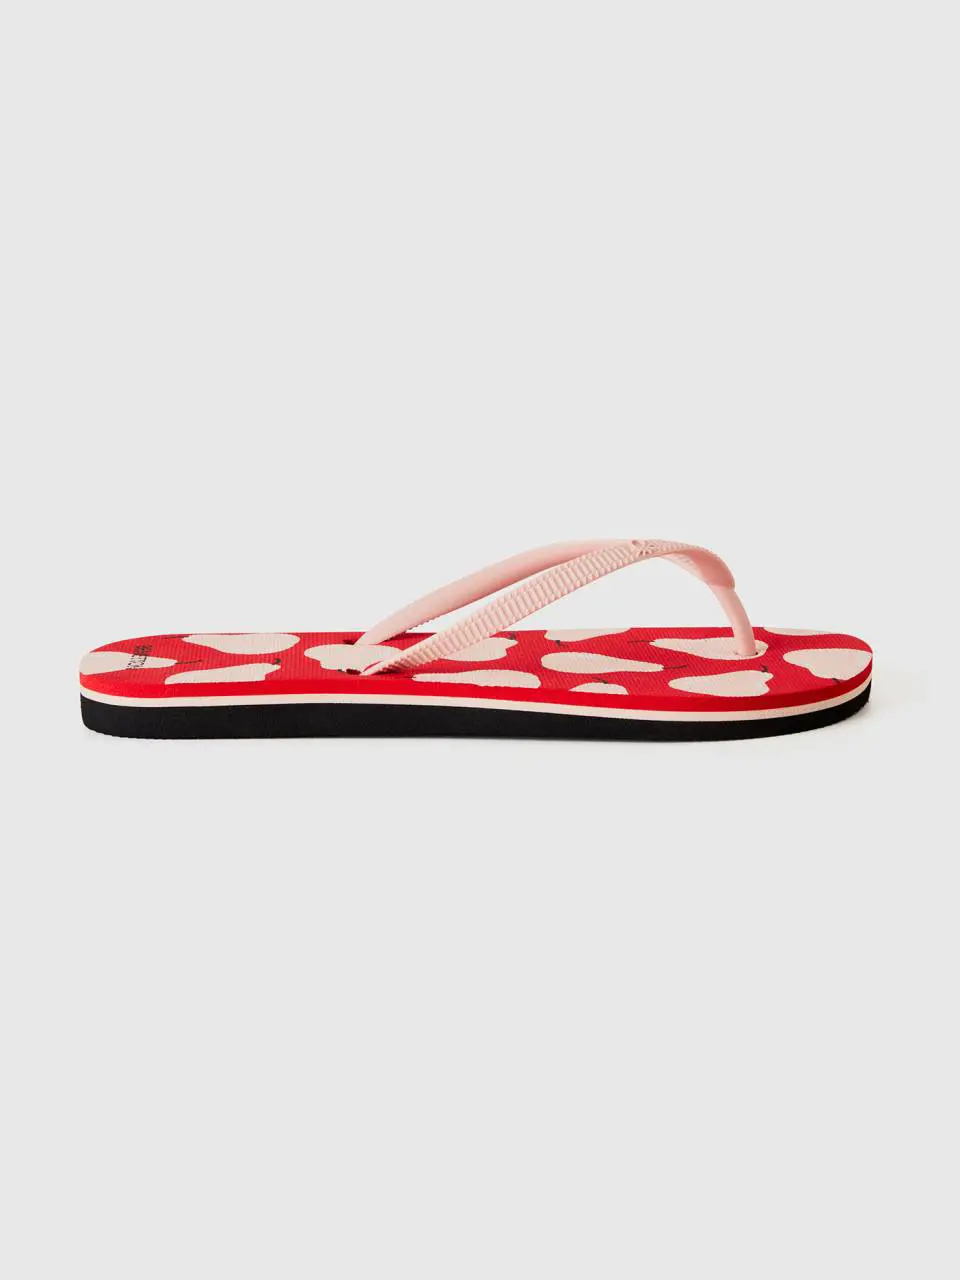 Benetton red flip flops with pear pattern. 1